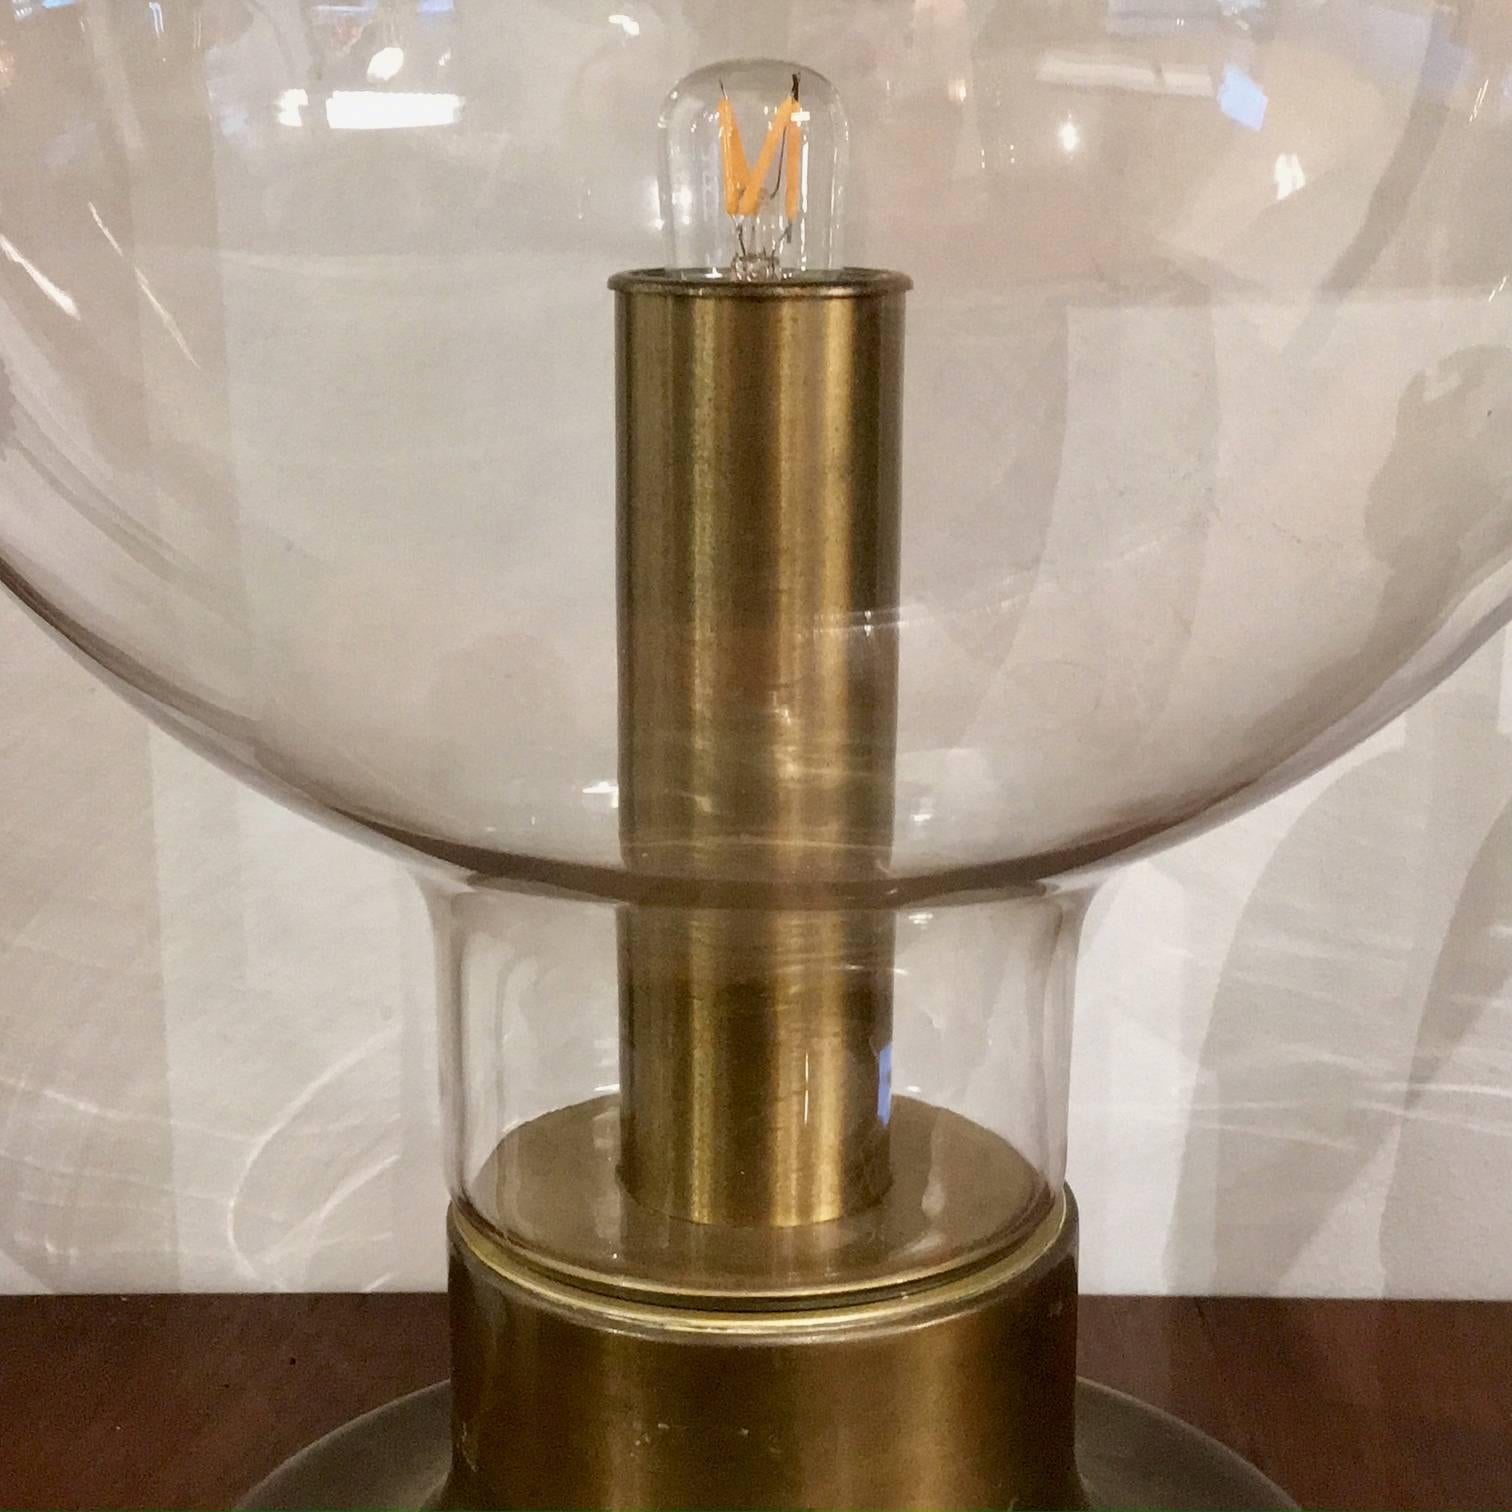 A mid-20th century table lamp in the style of a hurricane lamp. The piece comprises a large open glass bowl, which has a very slight grey tint, over a deep gold coloured interior and a patinated bronzed steel base. Overall it is in very nice vintage